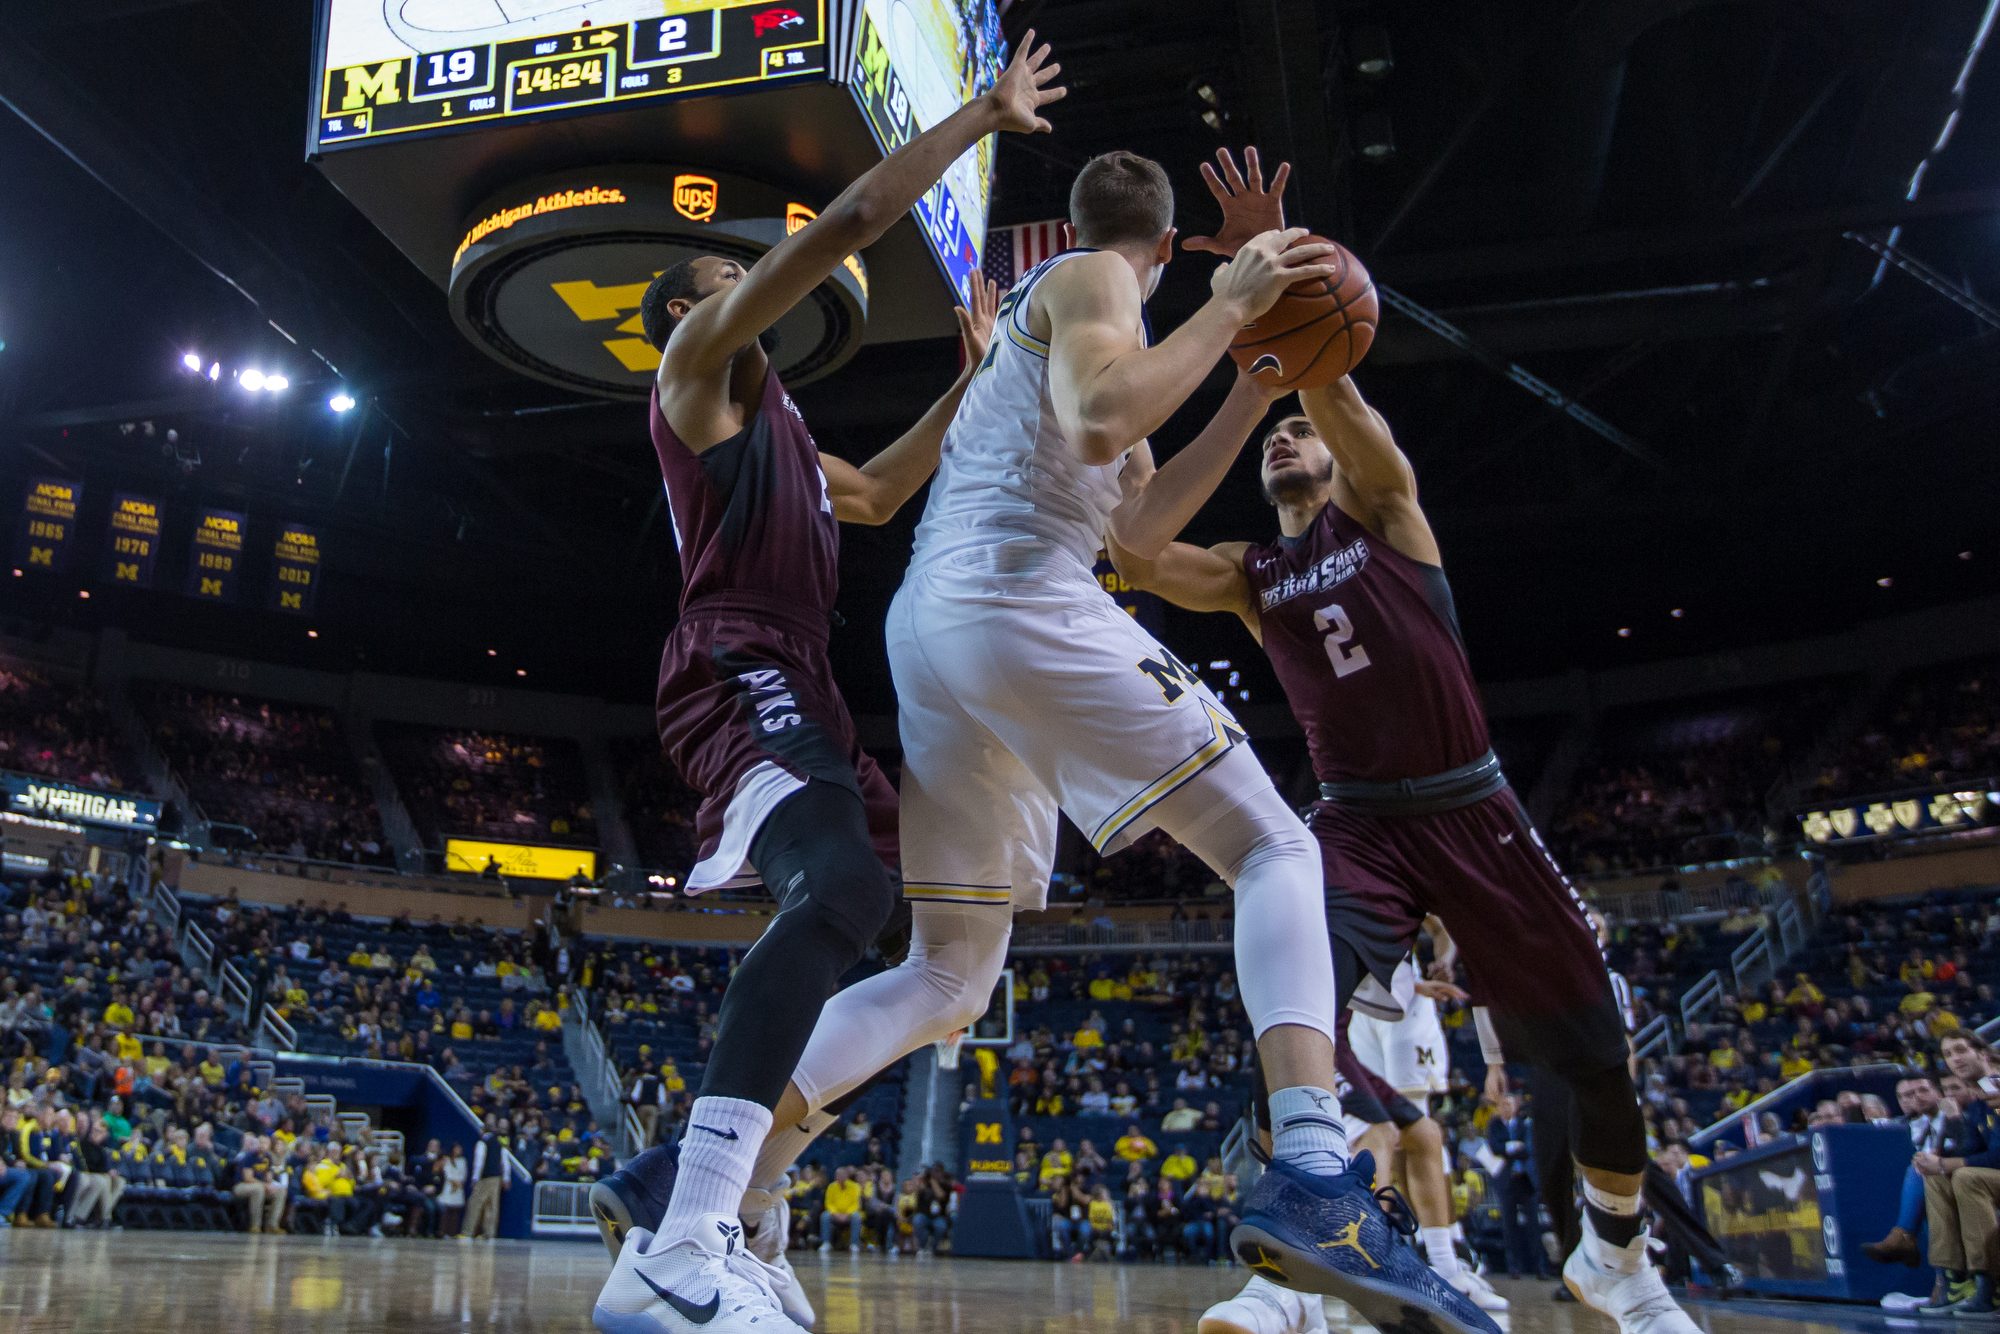  Michigan�s Duncan Robinson (22) gets double teamed by two Maryland Eastern Shore defenders during the first half of play at the Crisler Center on Saturday, December 17, 2016. Michigan leads Maryland Eastern Shore 49-22 at half. Matt Weigand | The An